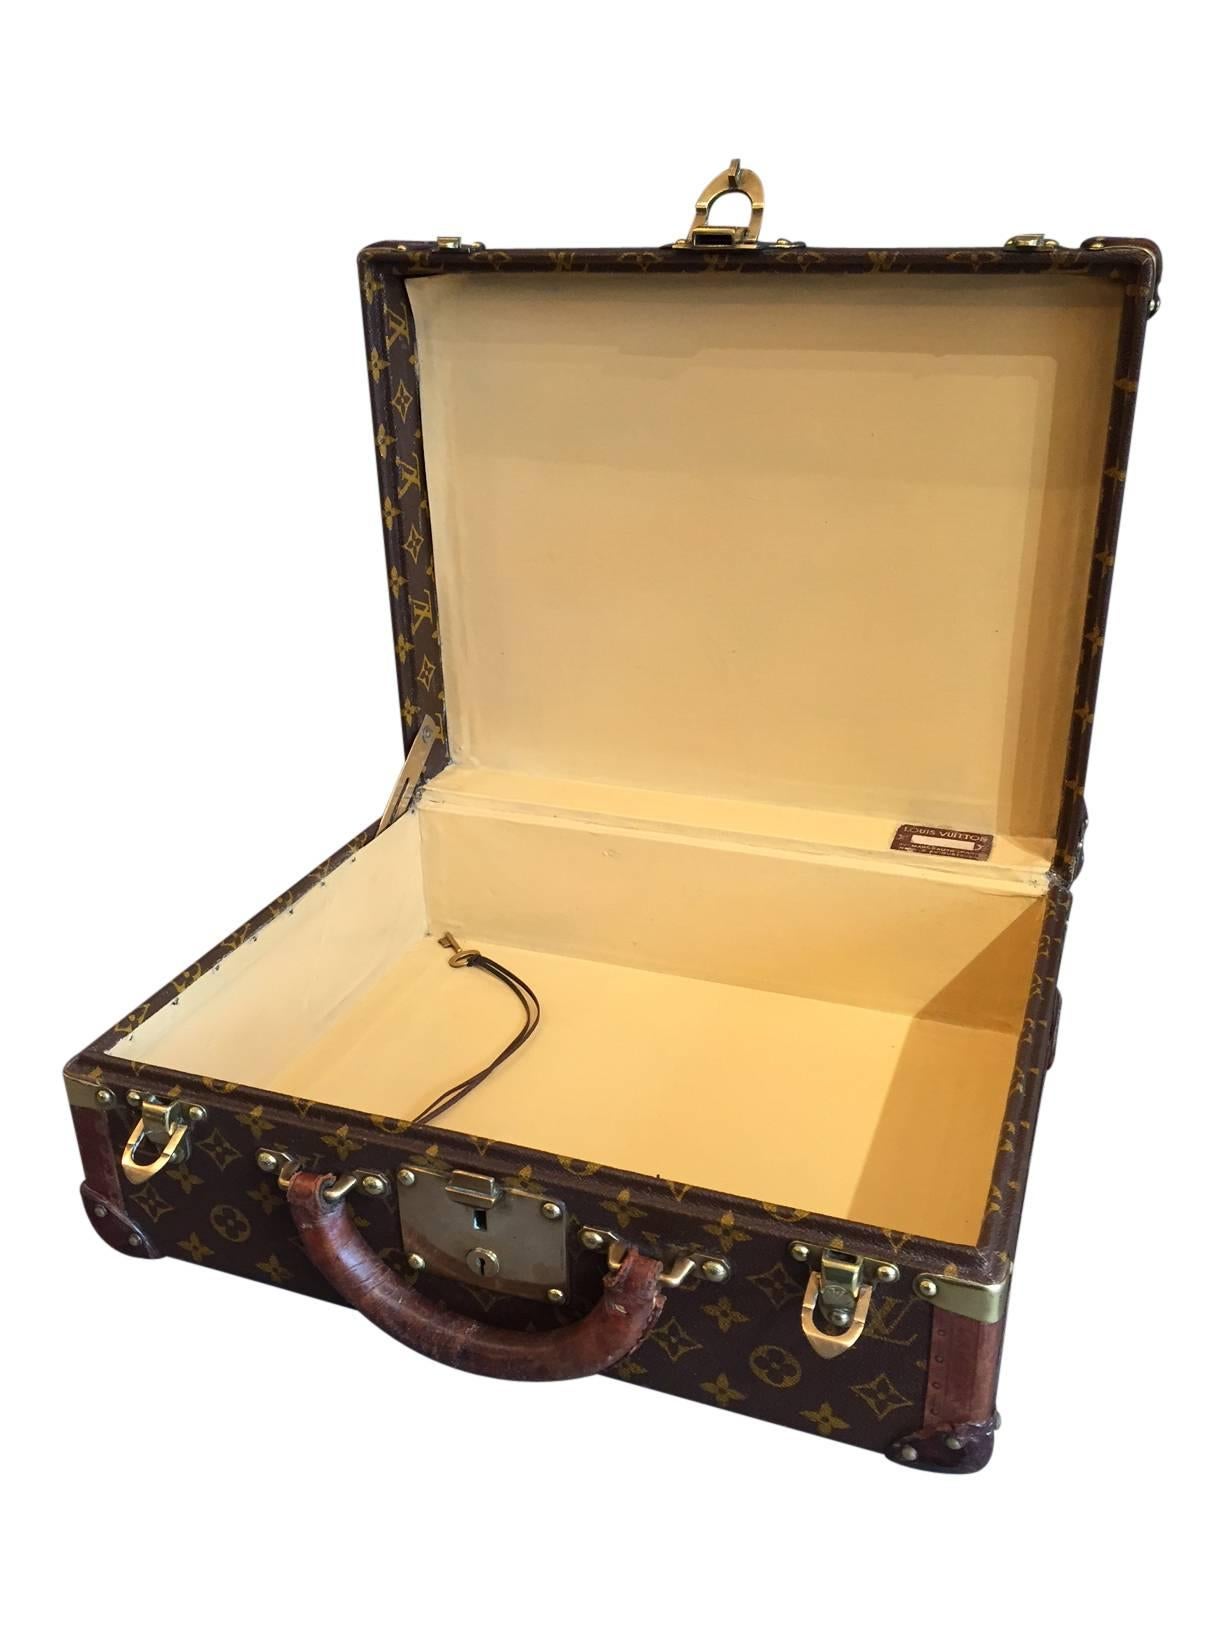 A vintage Mid-Century Louis Vuitton briefcase, circa 1950. It features leather corners and comes with its original key, a true rarity for any Louis Vuitton piece.